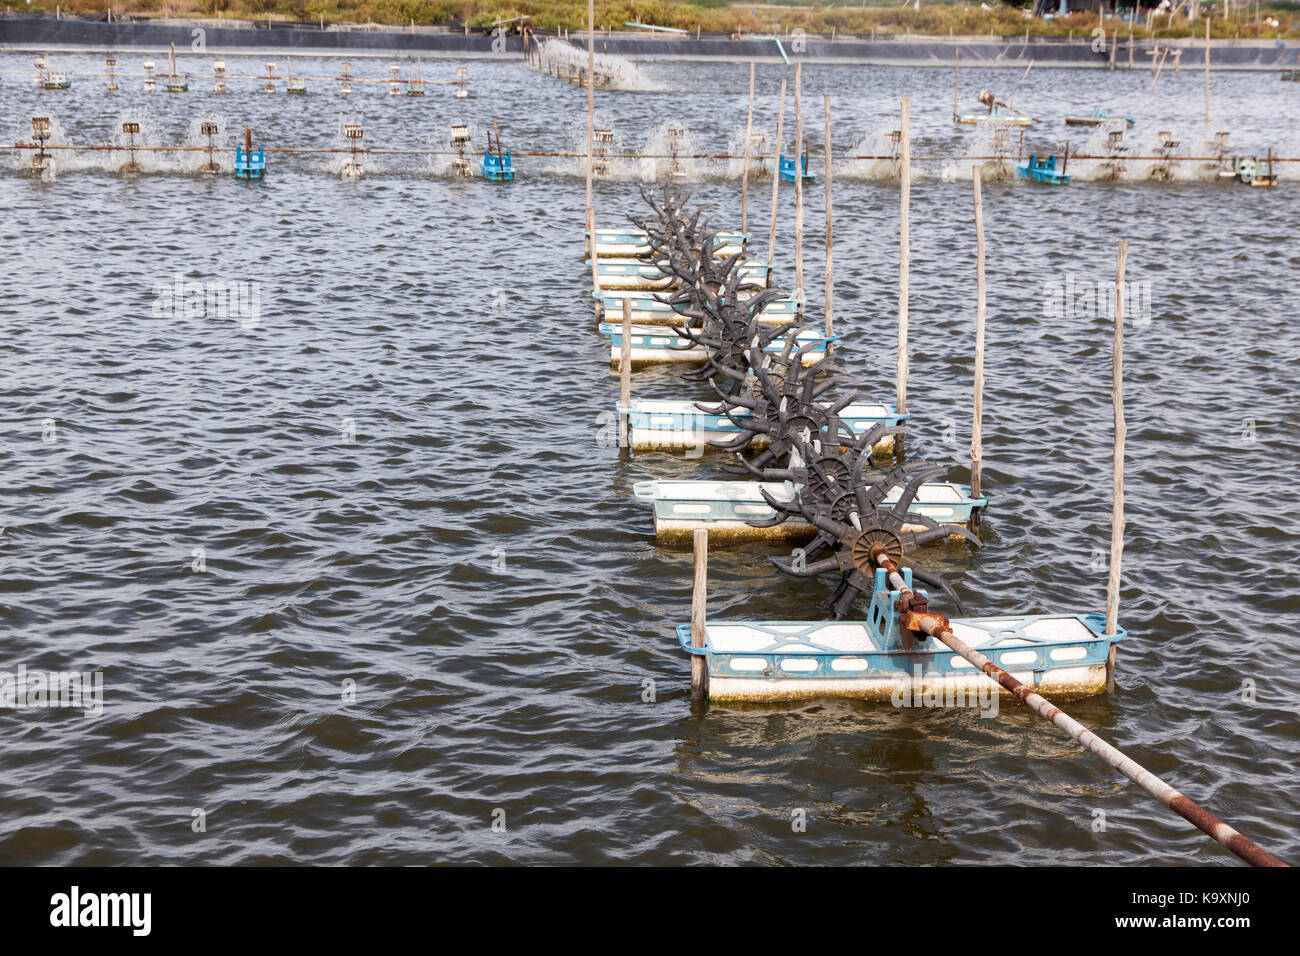 Paddle wheel aerator in Shrimp farming closed system. Supplying the Water with Fresh Oxygen. Natural Water Treatment. Stock Photo